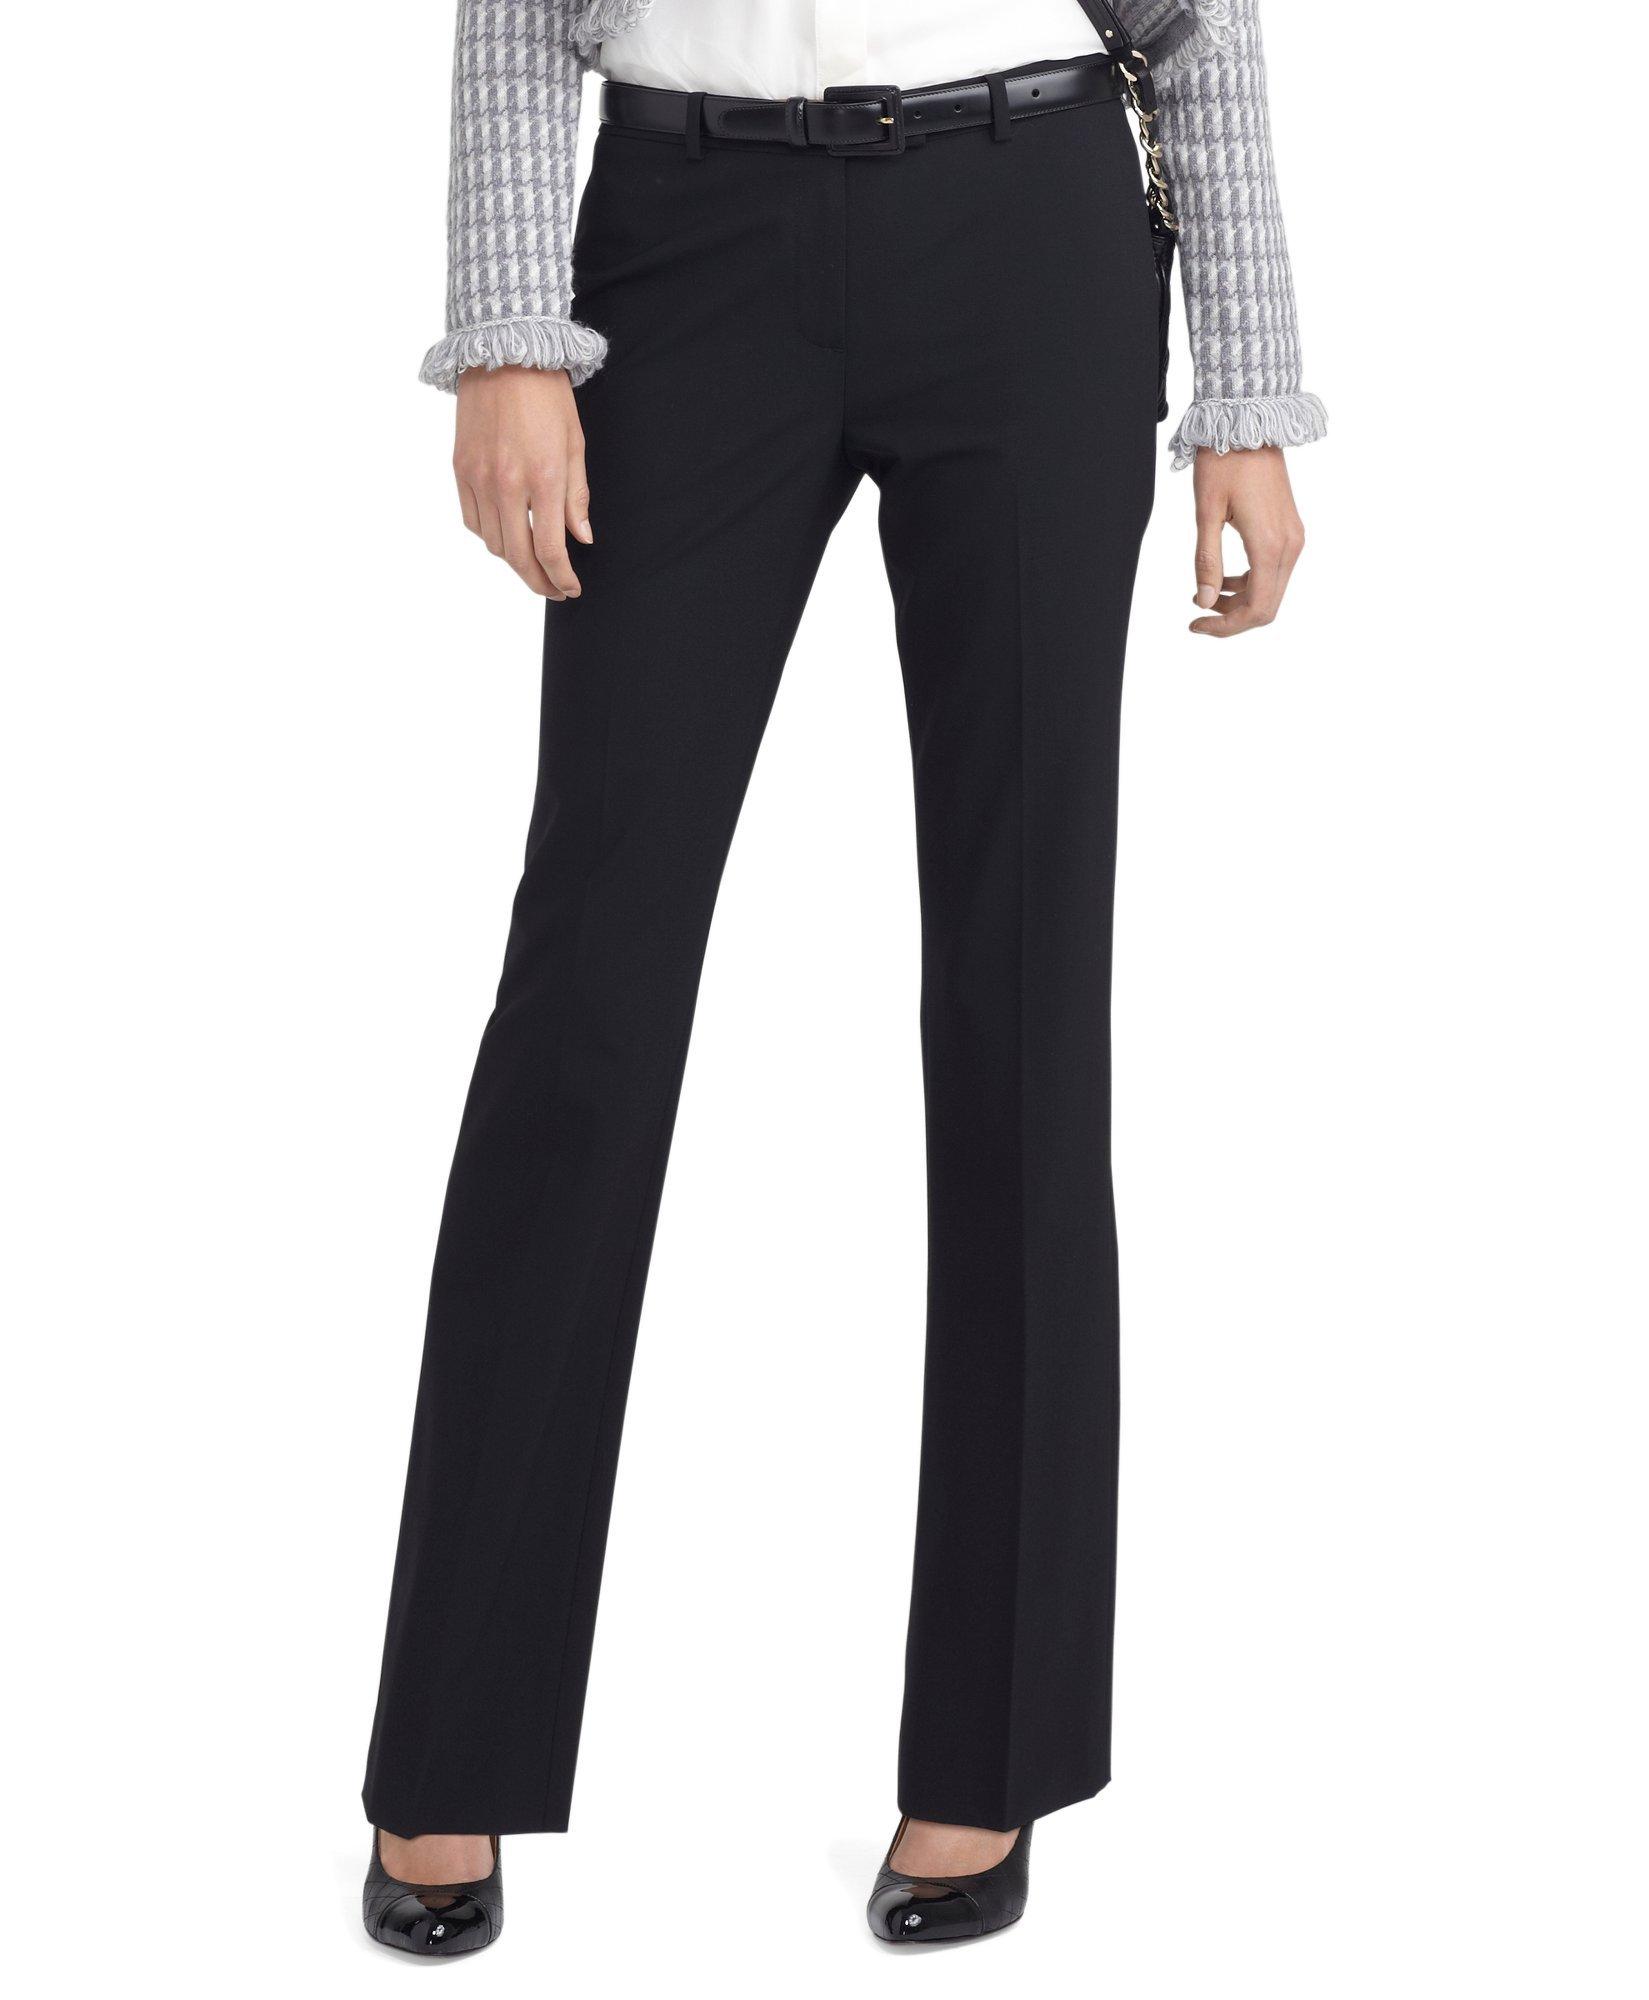 Women's Wool Stretch Lucia Trousers